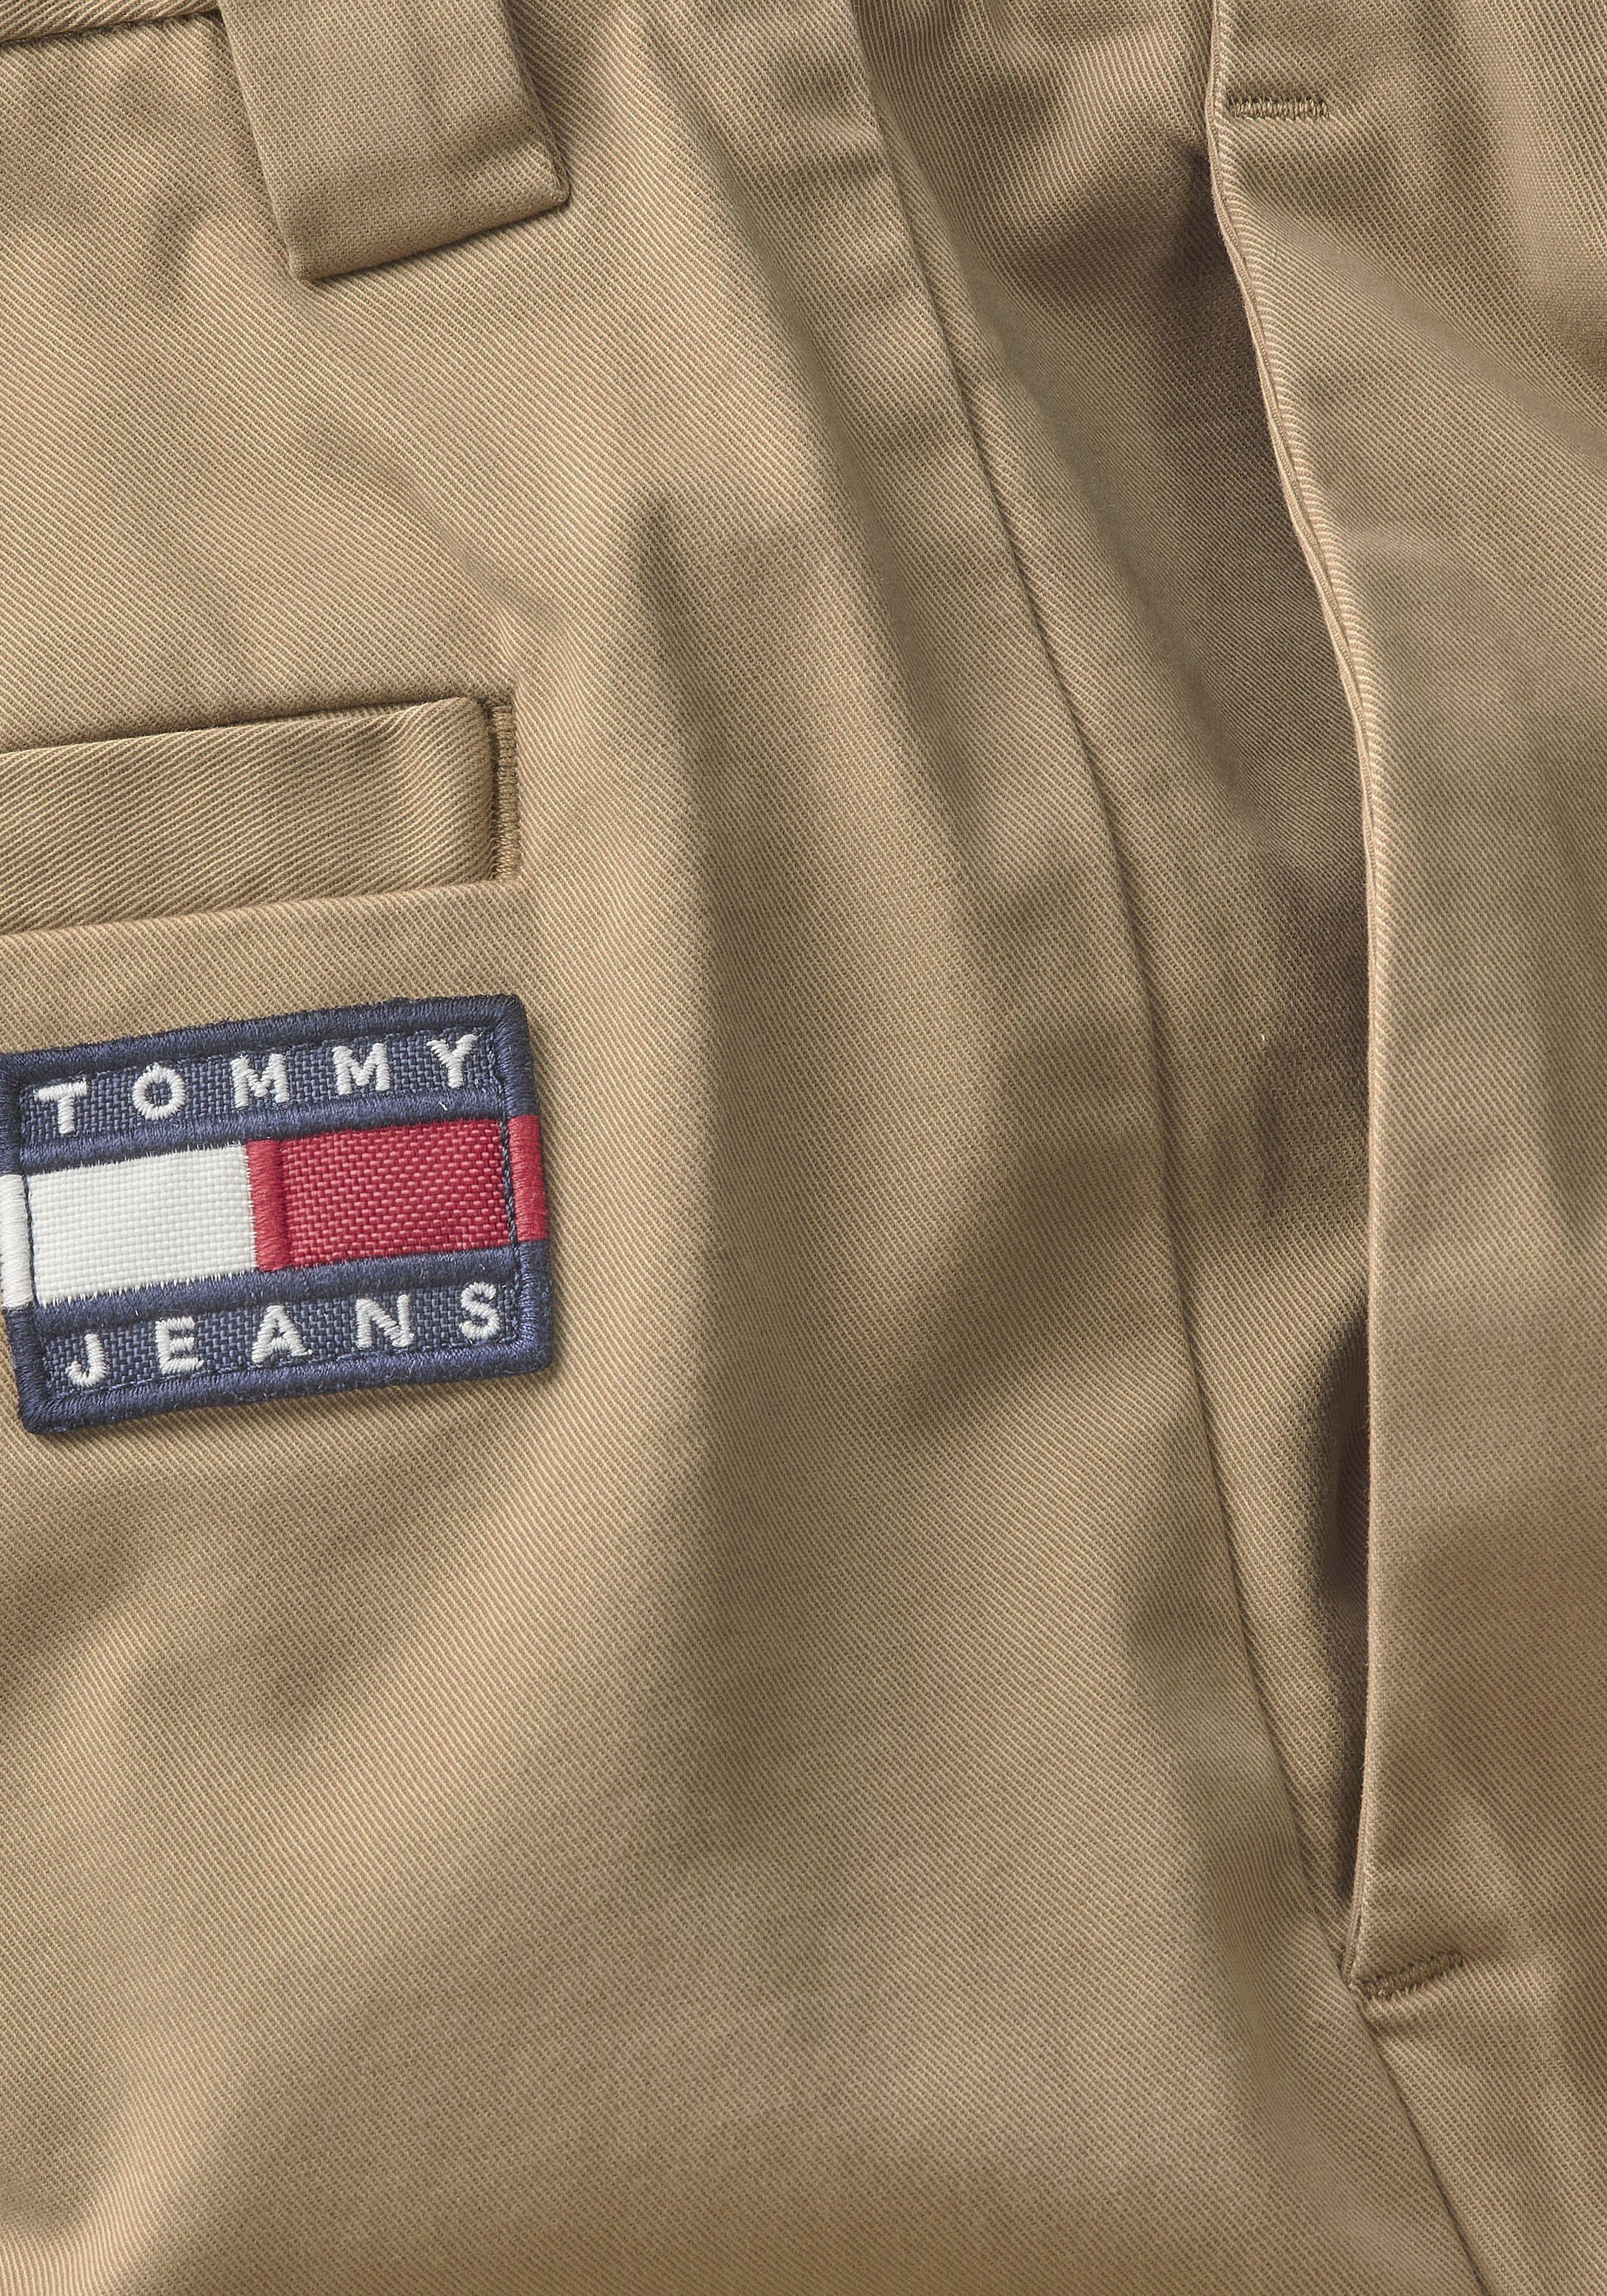 Tommy Jeans Khaki TJM CHINO Classic Label-Badge Chinohose DAD mit